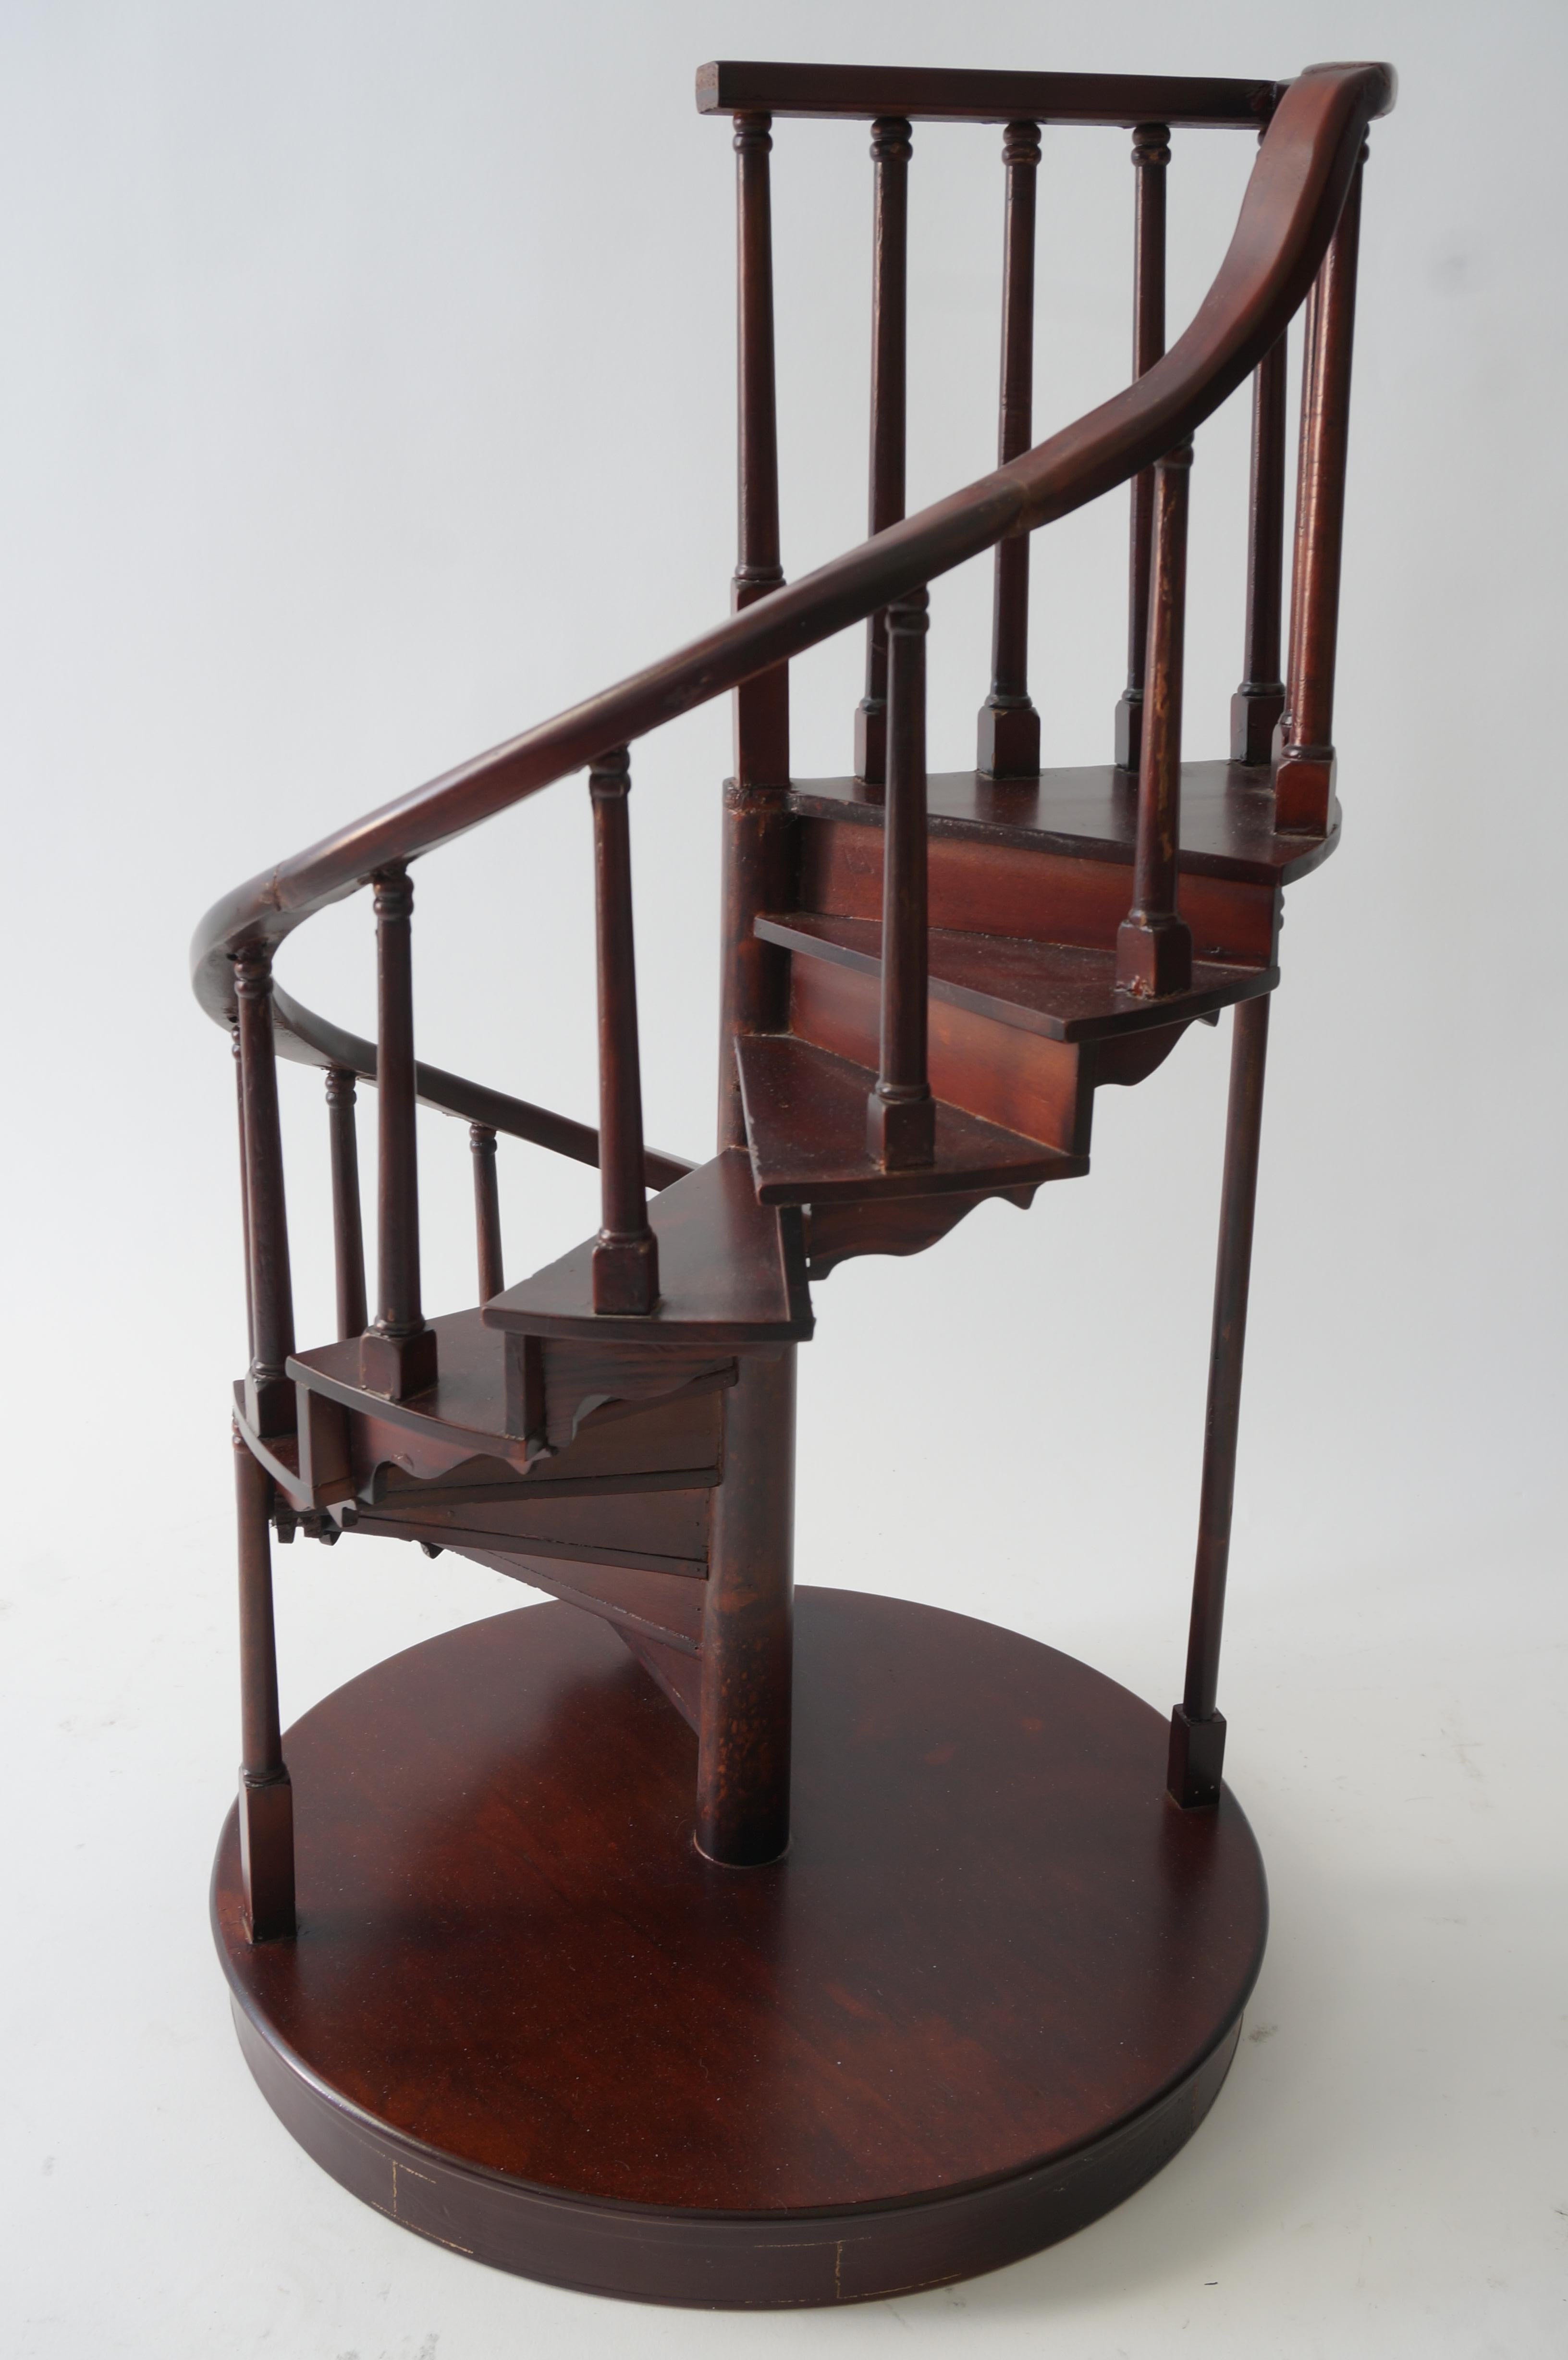 American Spiral Staircase Architectural Model in Mahogany